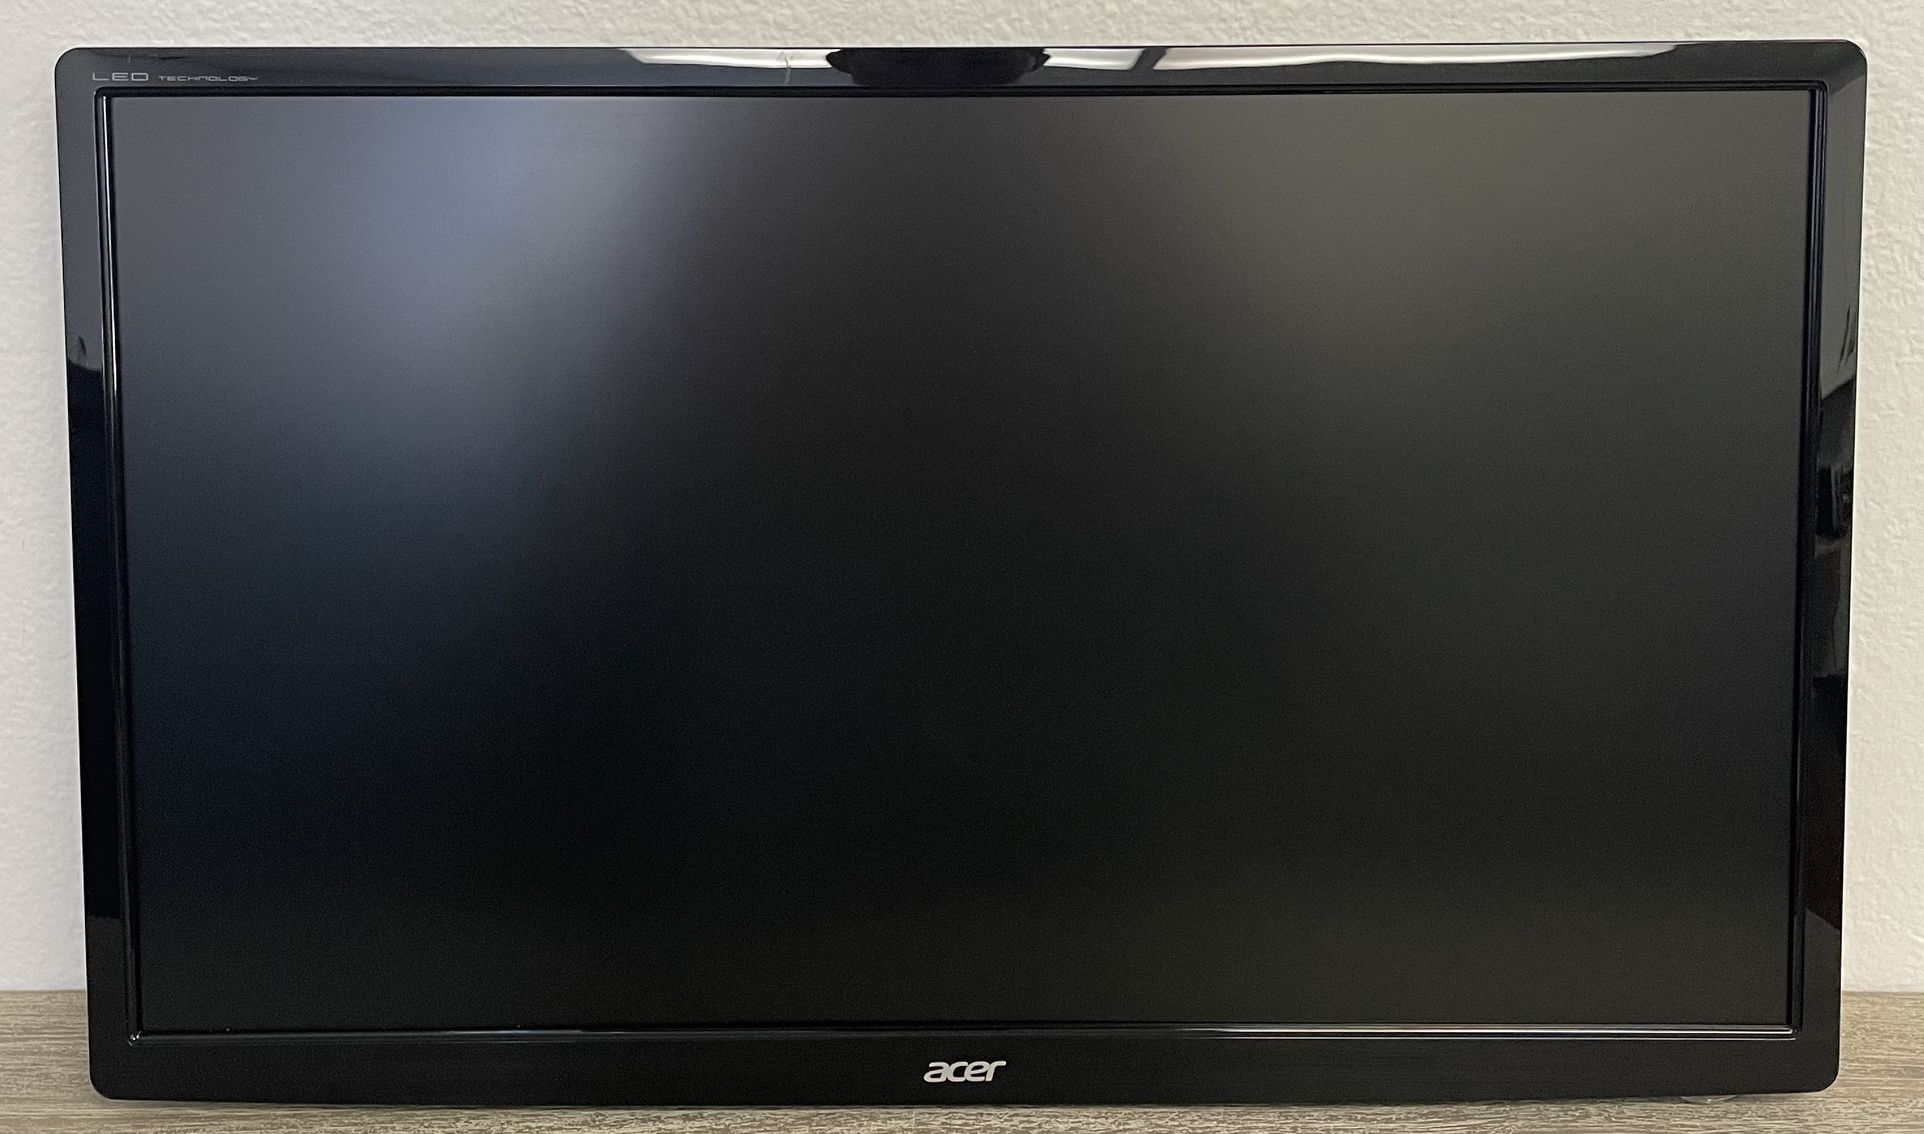 Acer Monitor Sept. 2014. USED